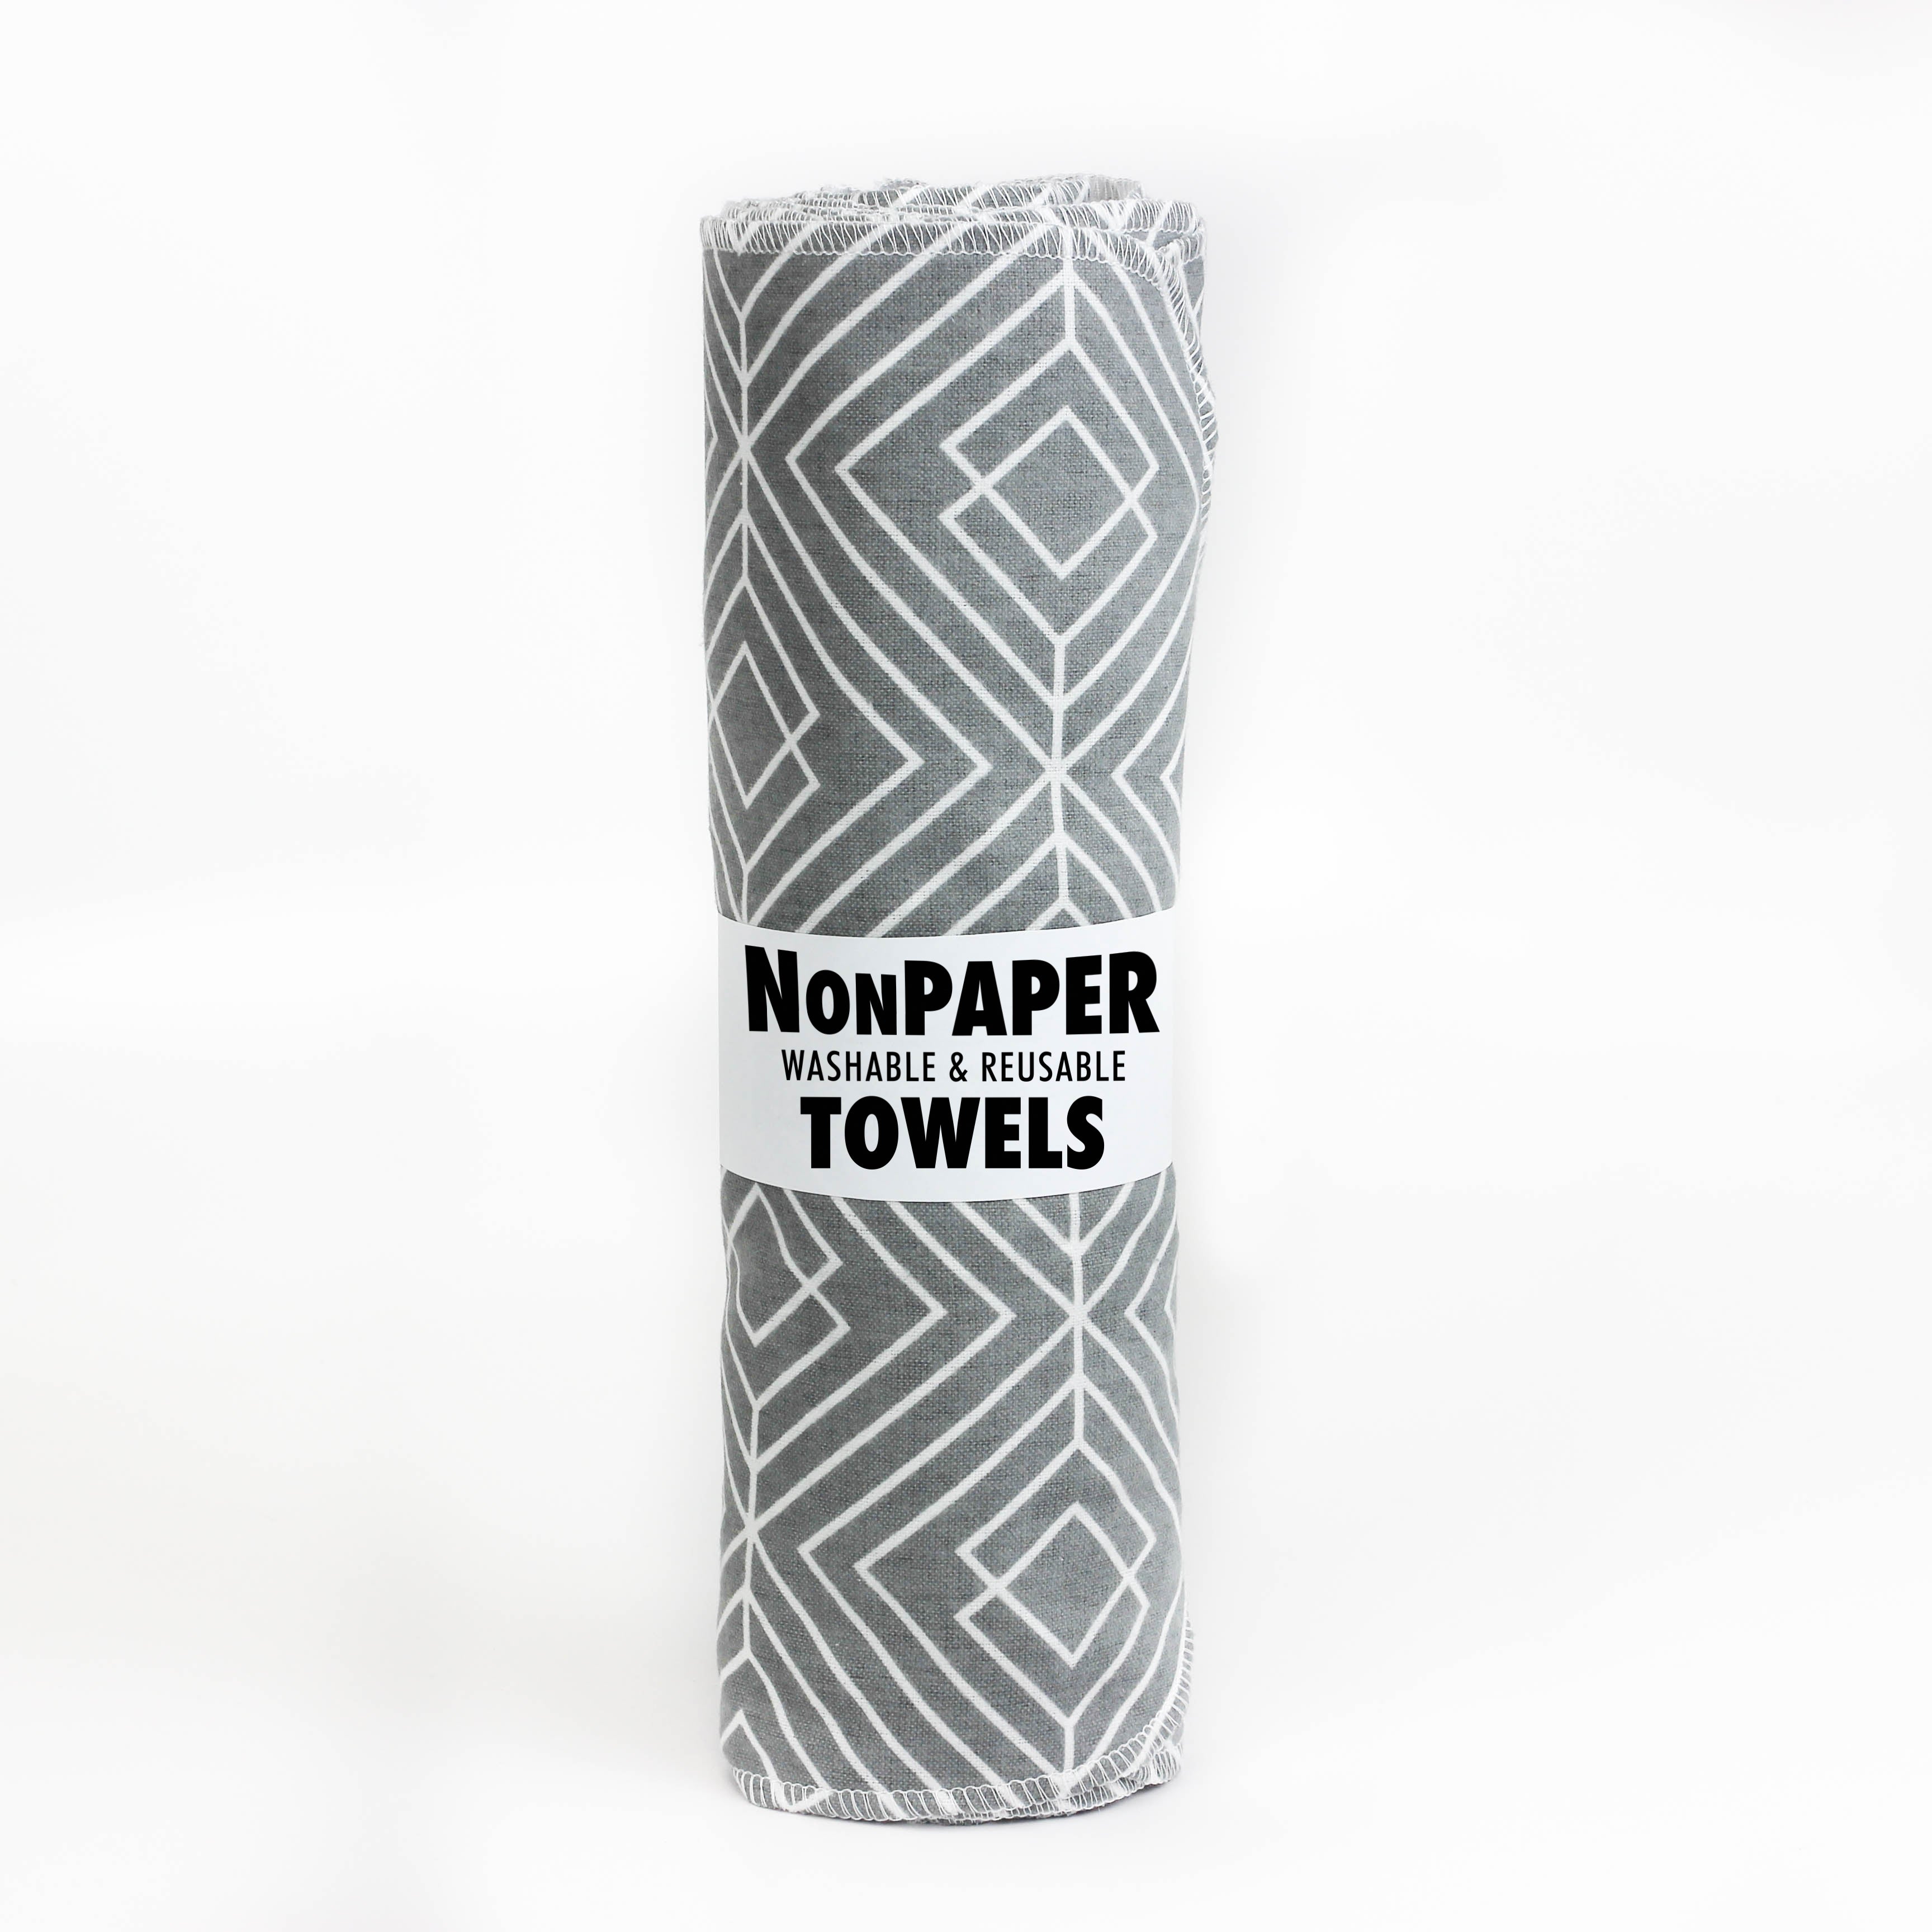 BOJUST Reusable Paper Towels Roll | 12 Eco Friendly Washable Cotton Flannel  Towels w/Cardboard Roll | Napkins Cloth Washable Reusable Paper Towel